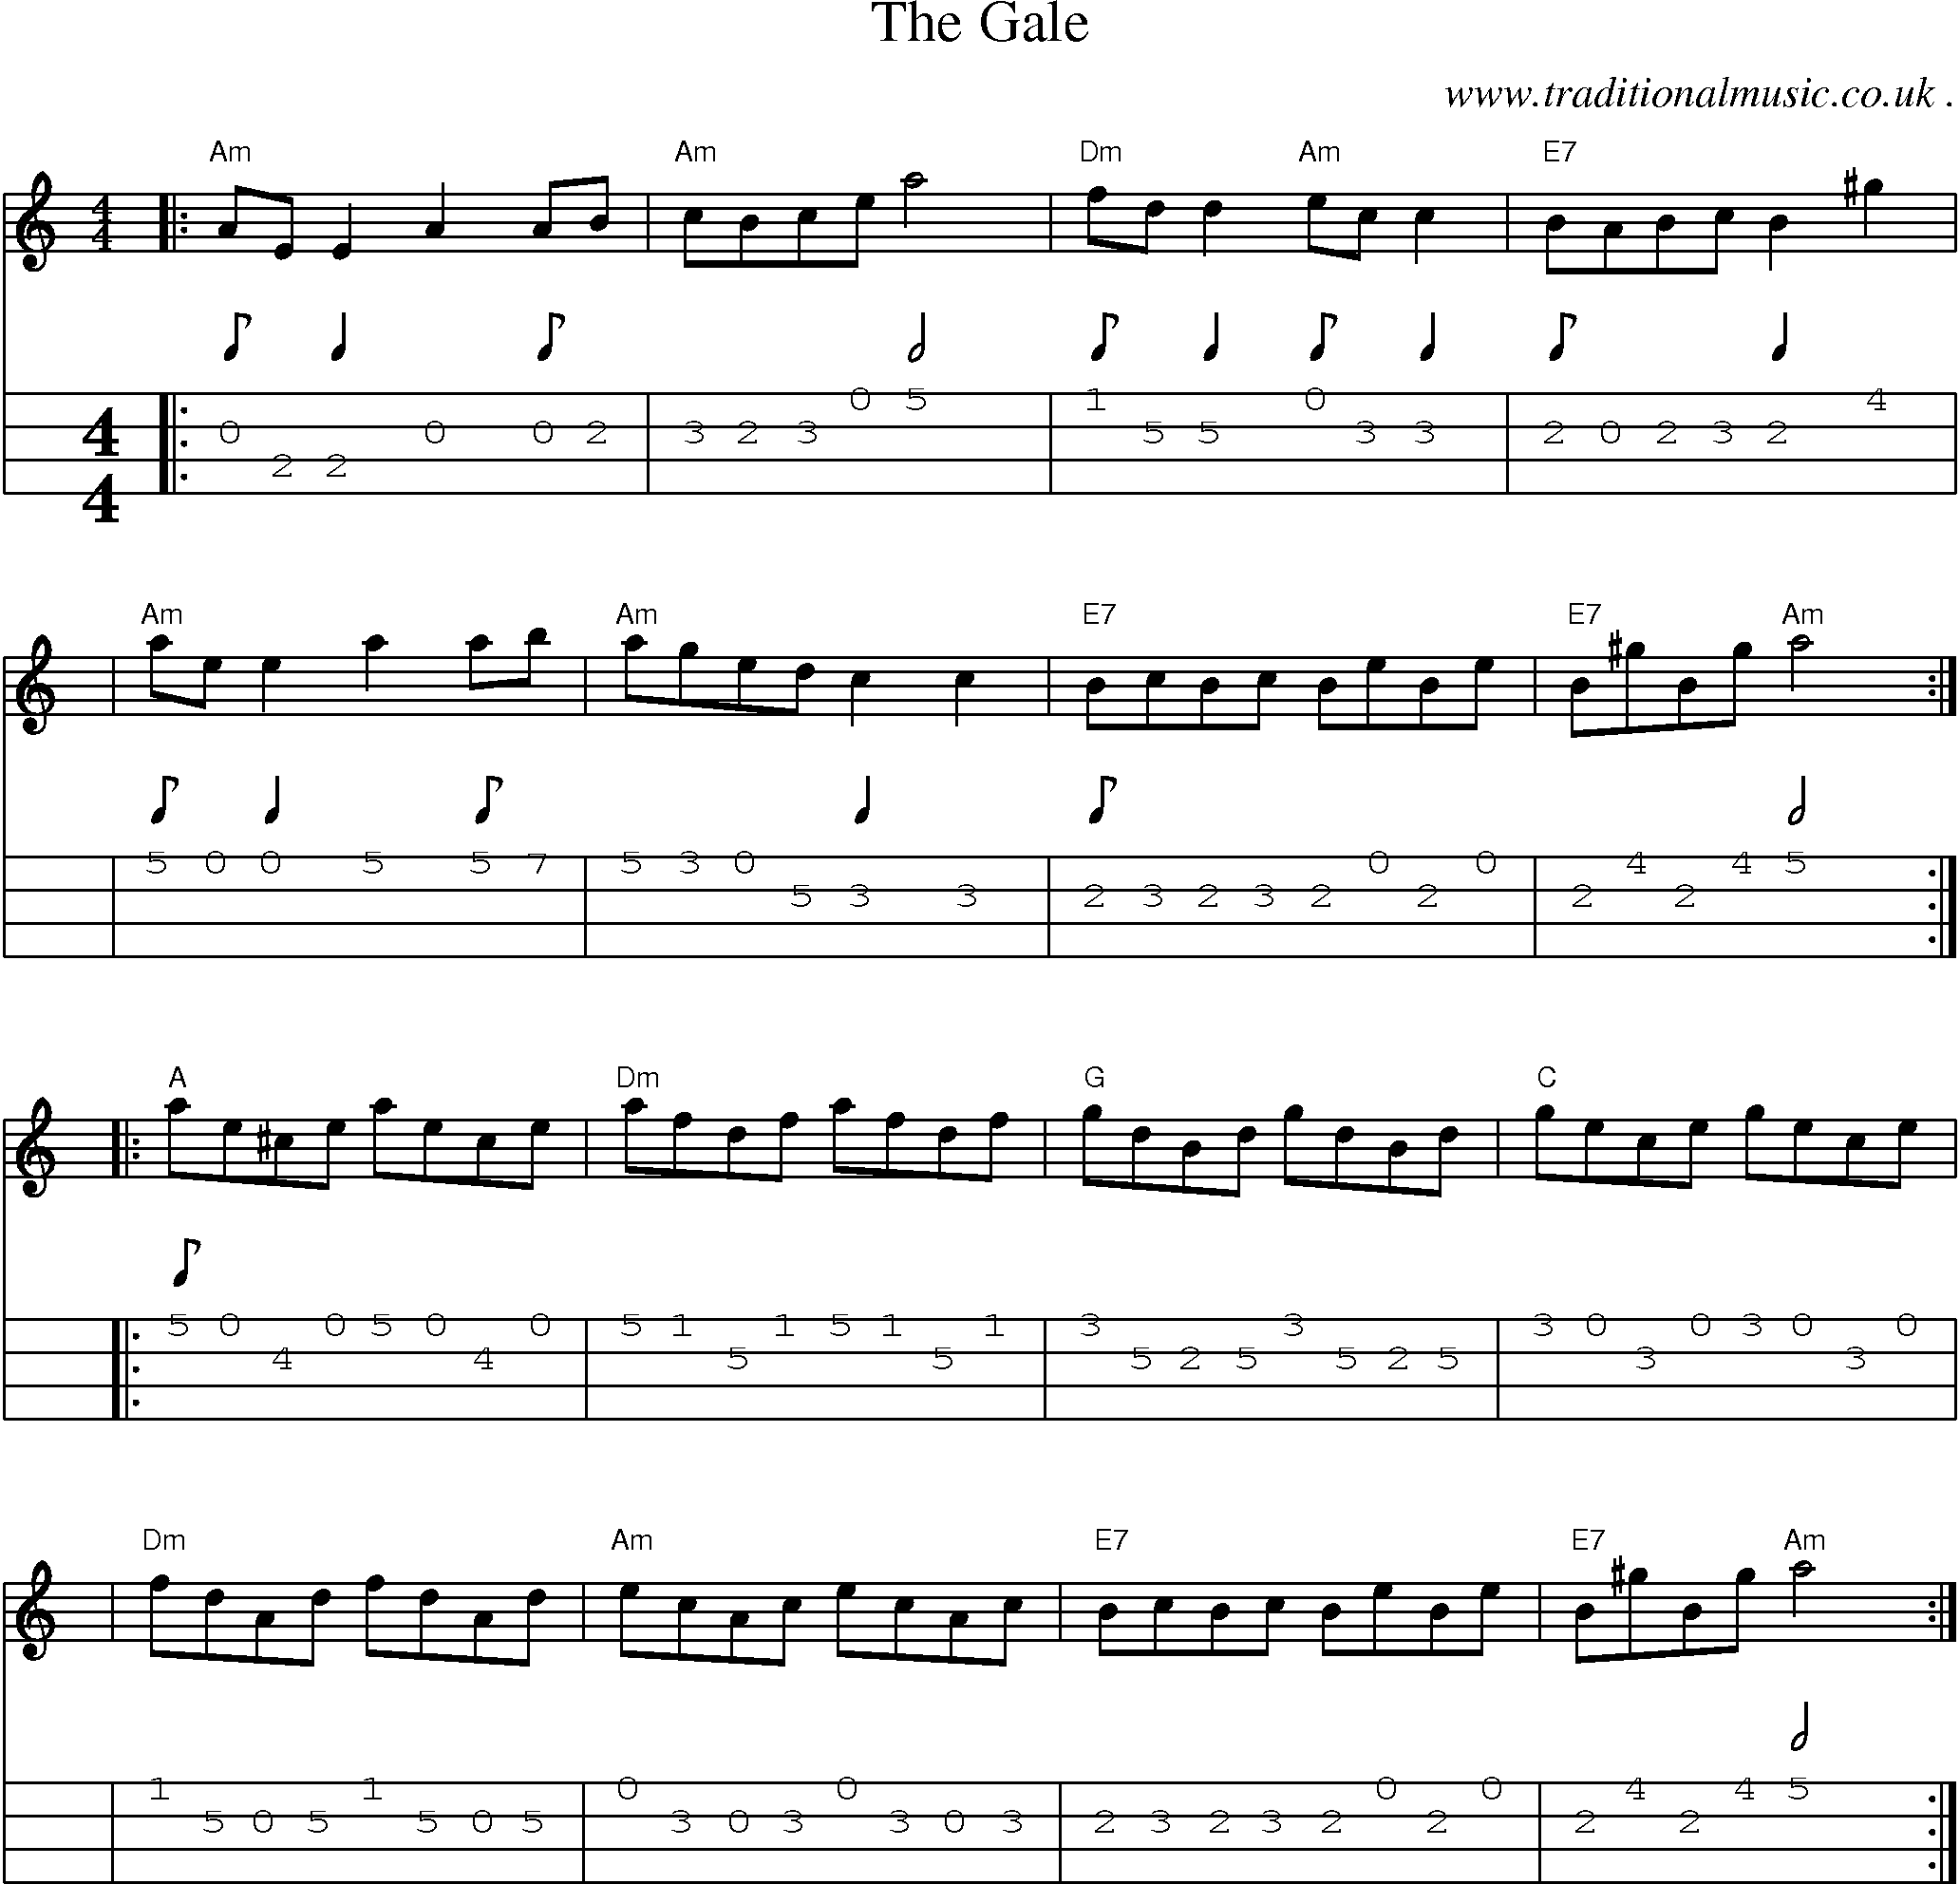 Sheet-music  score, Chords and Mandolin Tabs for The Gale